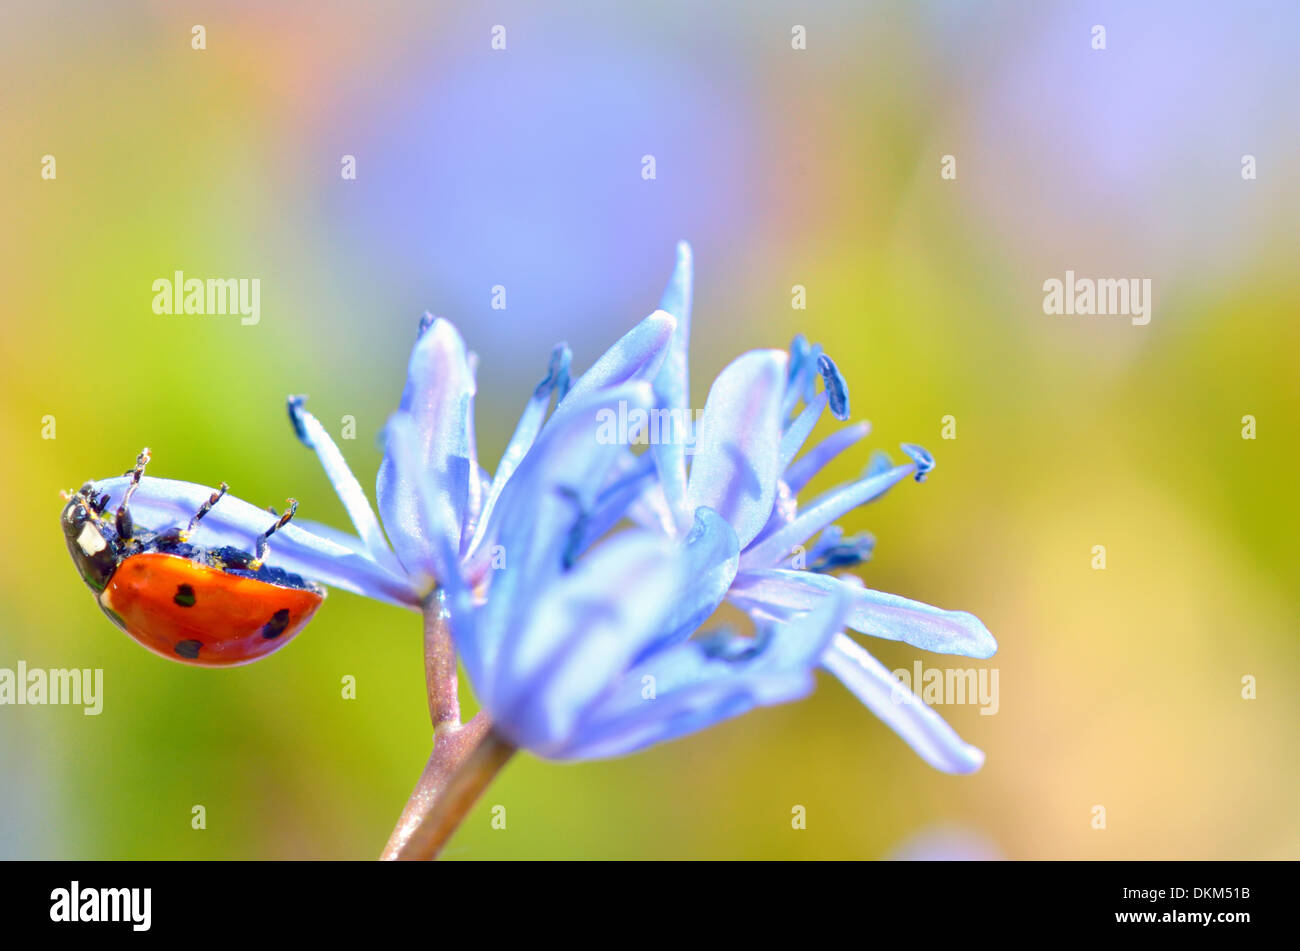 Ladybug on flower in spring time Stock Photo